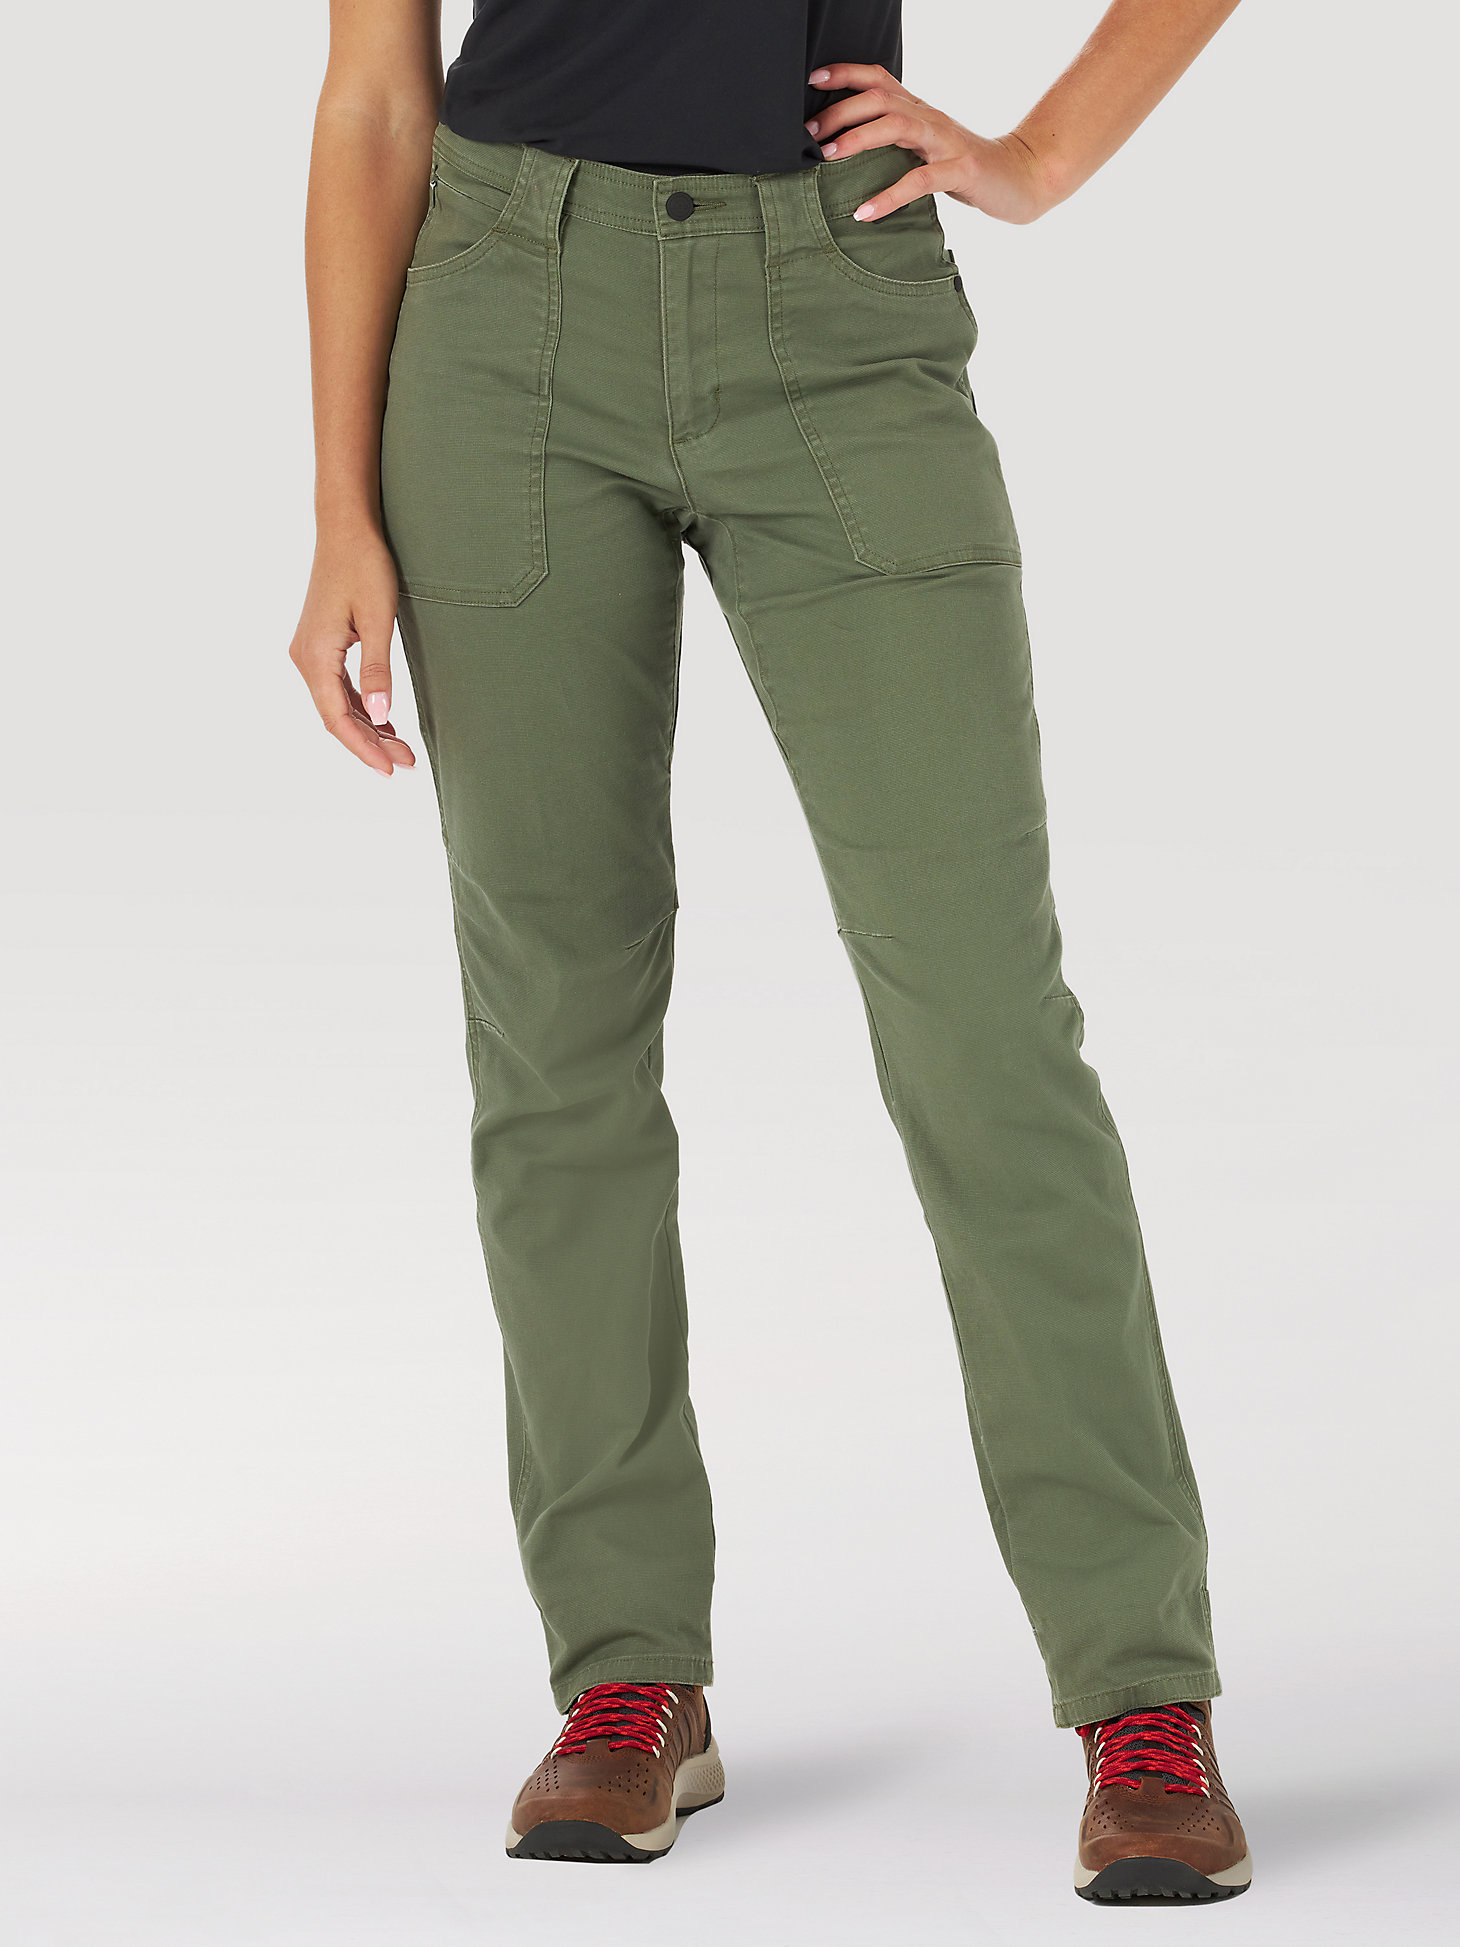 ATG By Wrangler™ Women's Canvas Pant in Olive main view